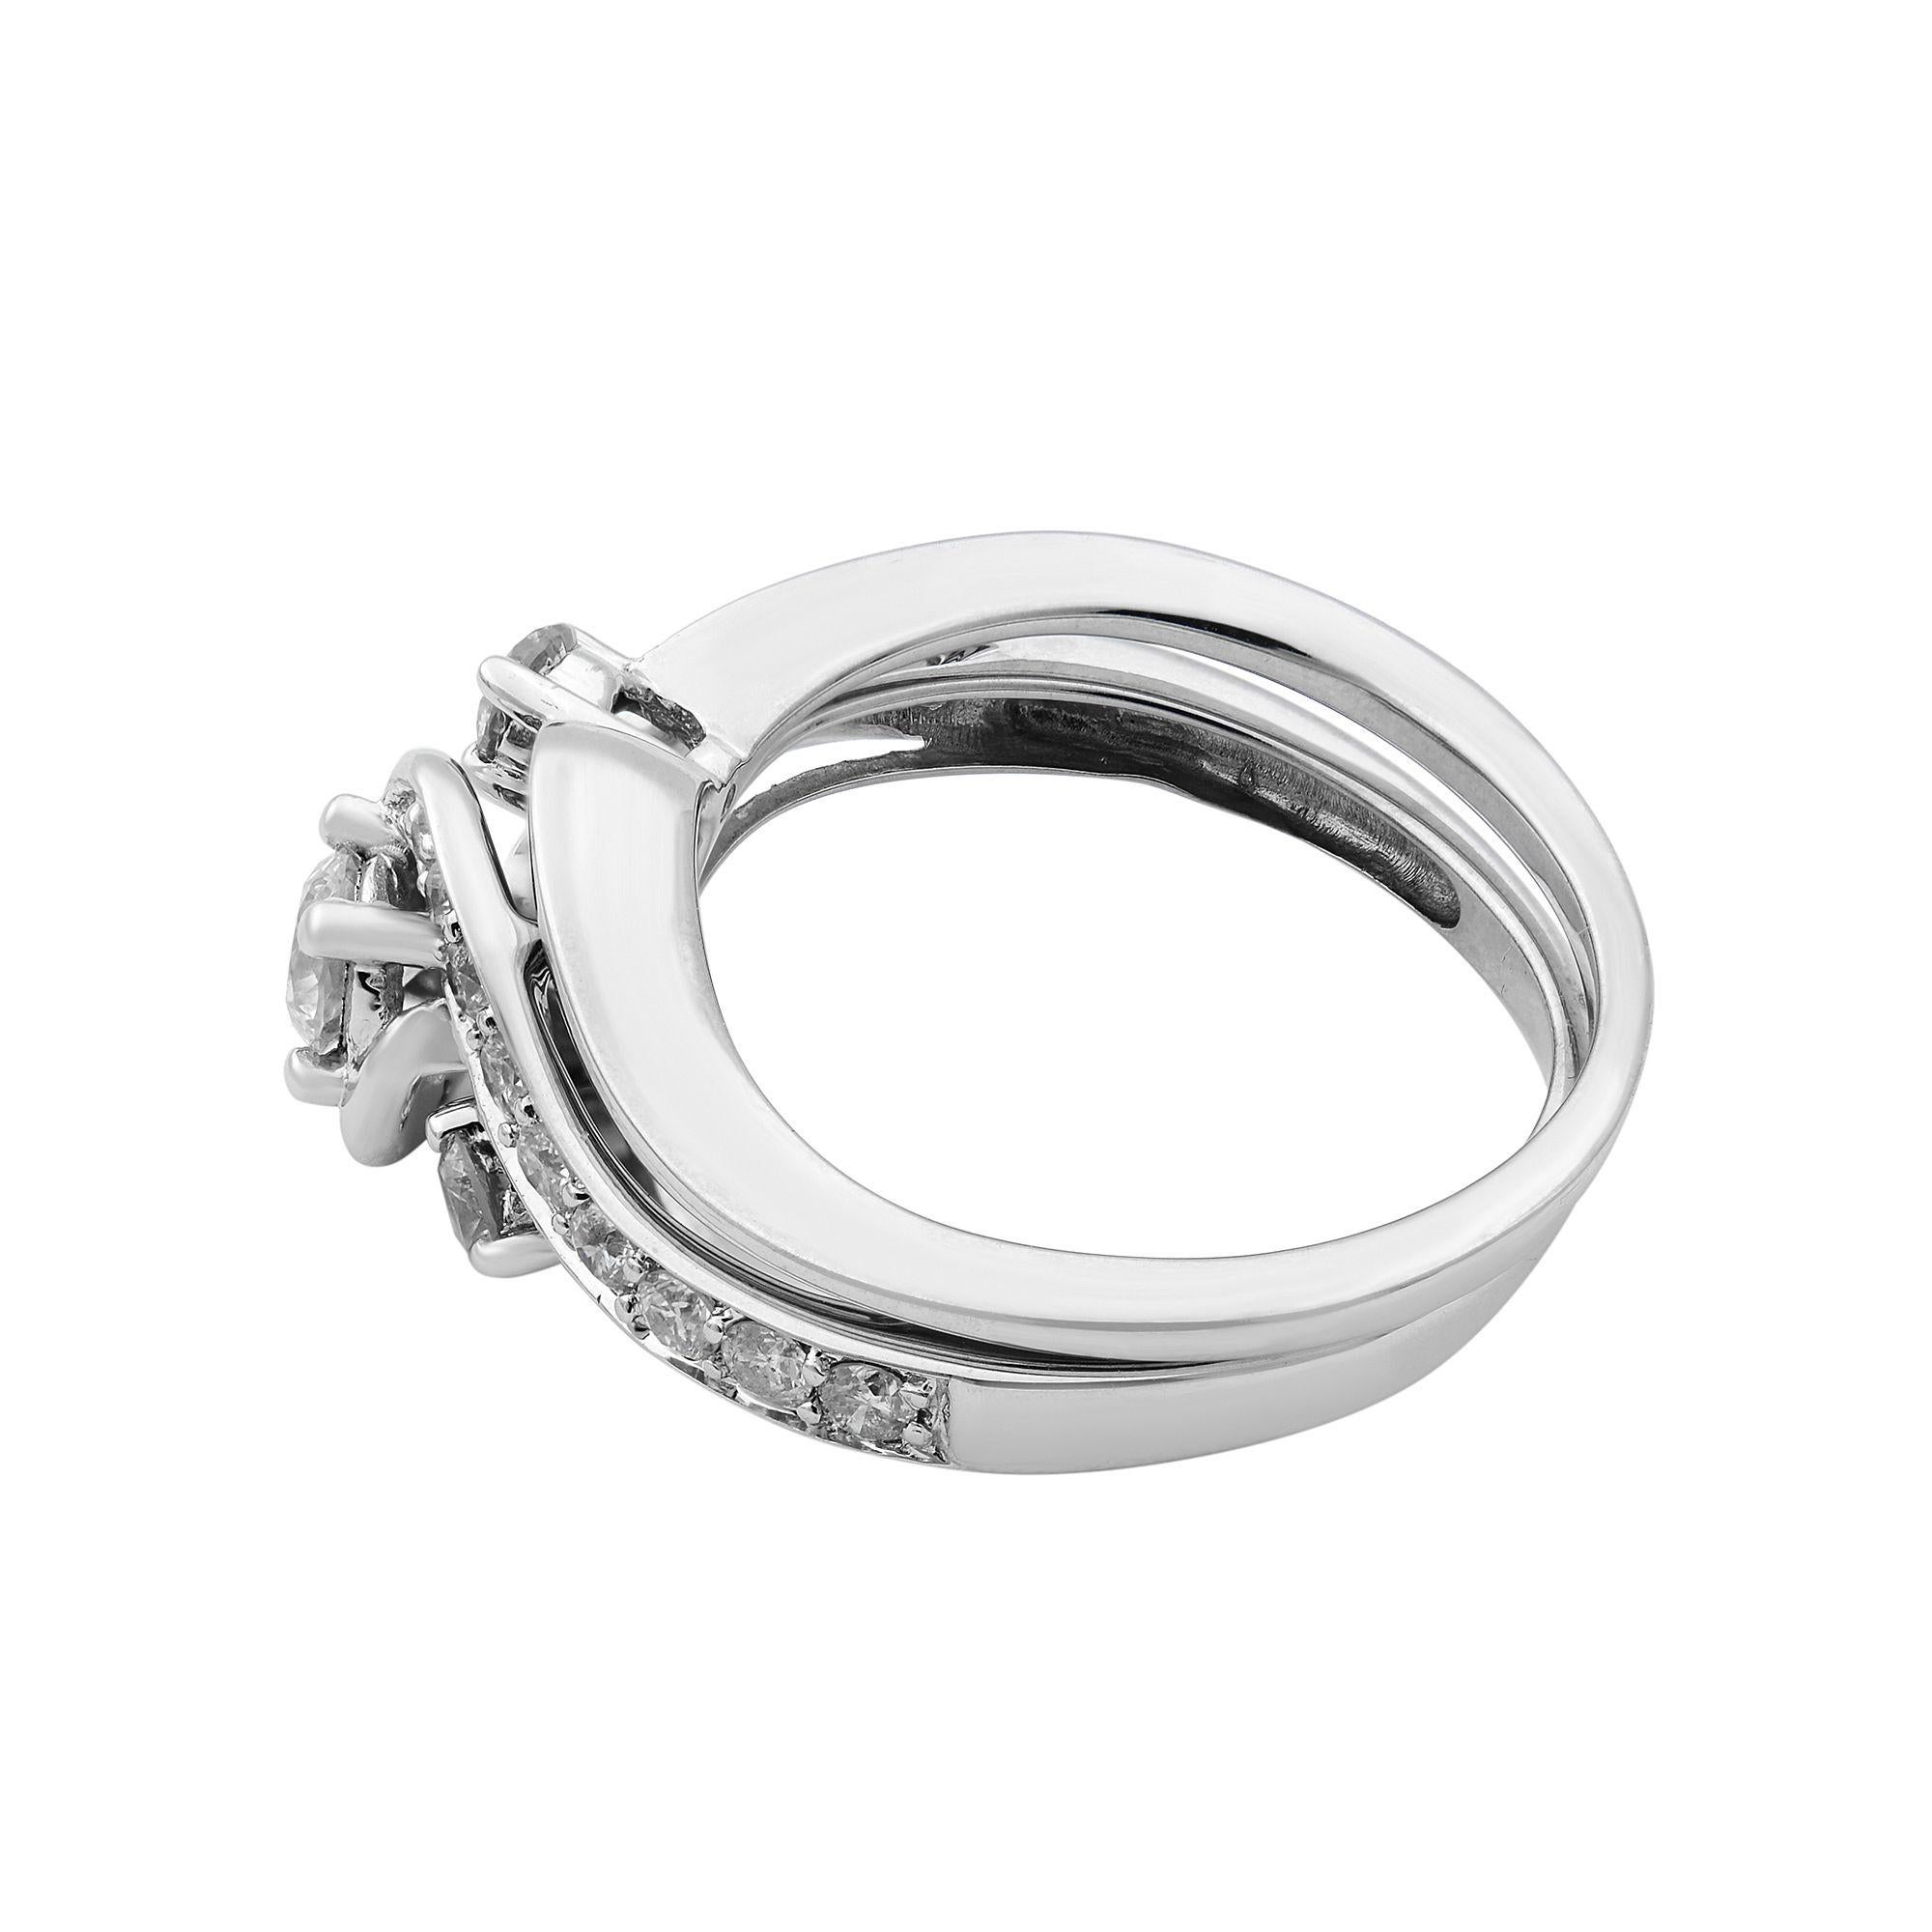 This sophisticated diamond bridal set is just her stunning style. Made with 14K white gold, the engagement ring features a sparkling 0.20cts diamond center stone. Smaller accent diamonds line the ring gracefully bypassing slant shank. On your